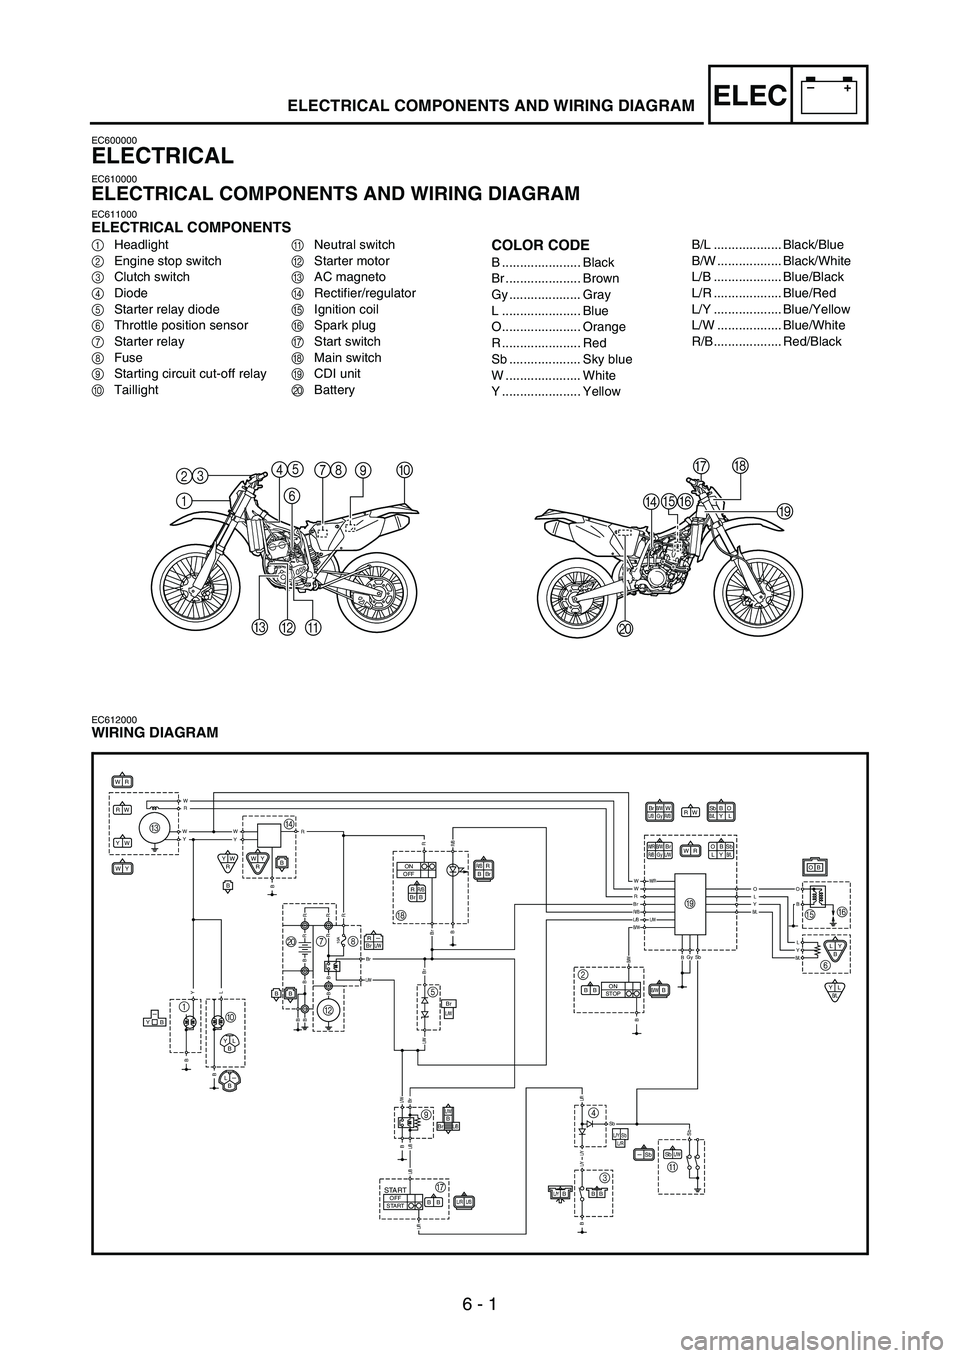 YAMAHA WR 250F 2005  Manuale de Empleo (in Spanish) 6 - 1
–+ELECELECTRICAL COMPONENTS AND WIRING DIAGRAM
EC600000
ELECTRICAL
EC610000
ELECTRICAL COMPONENTS AND WIRING DIAGRAM
EC611000ELECTRICAL COMPONENTS
1Headlight
2Engine stop switch
3Clutch switch